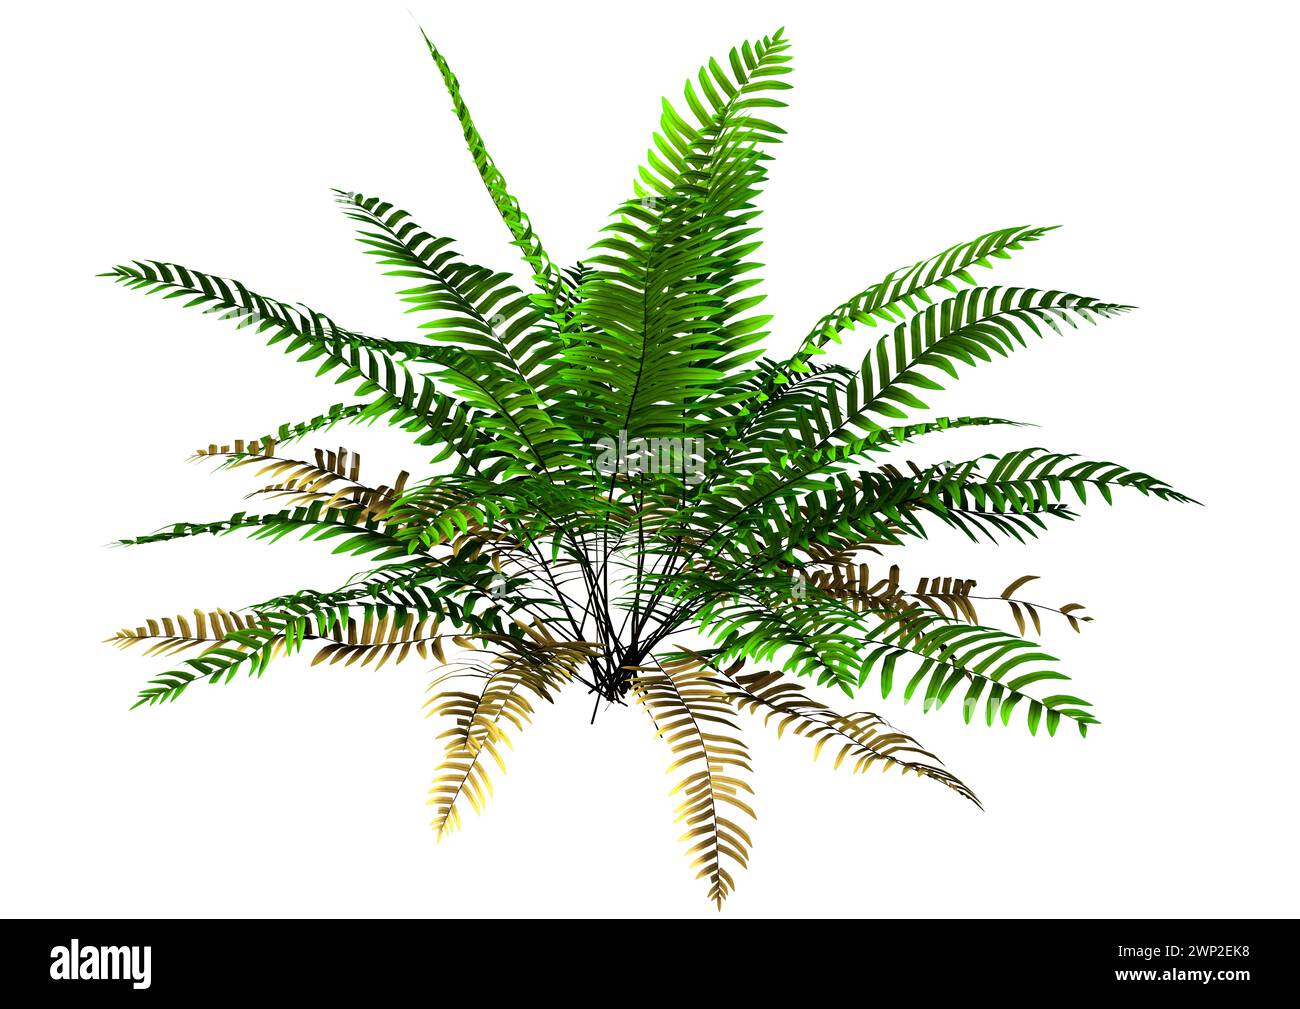 3D rendering of a green sword or Boston fern plant or Nephrolepis exaltata isolated on white background Stock Photo